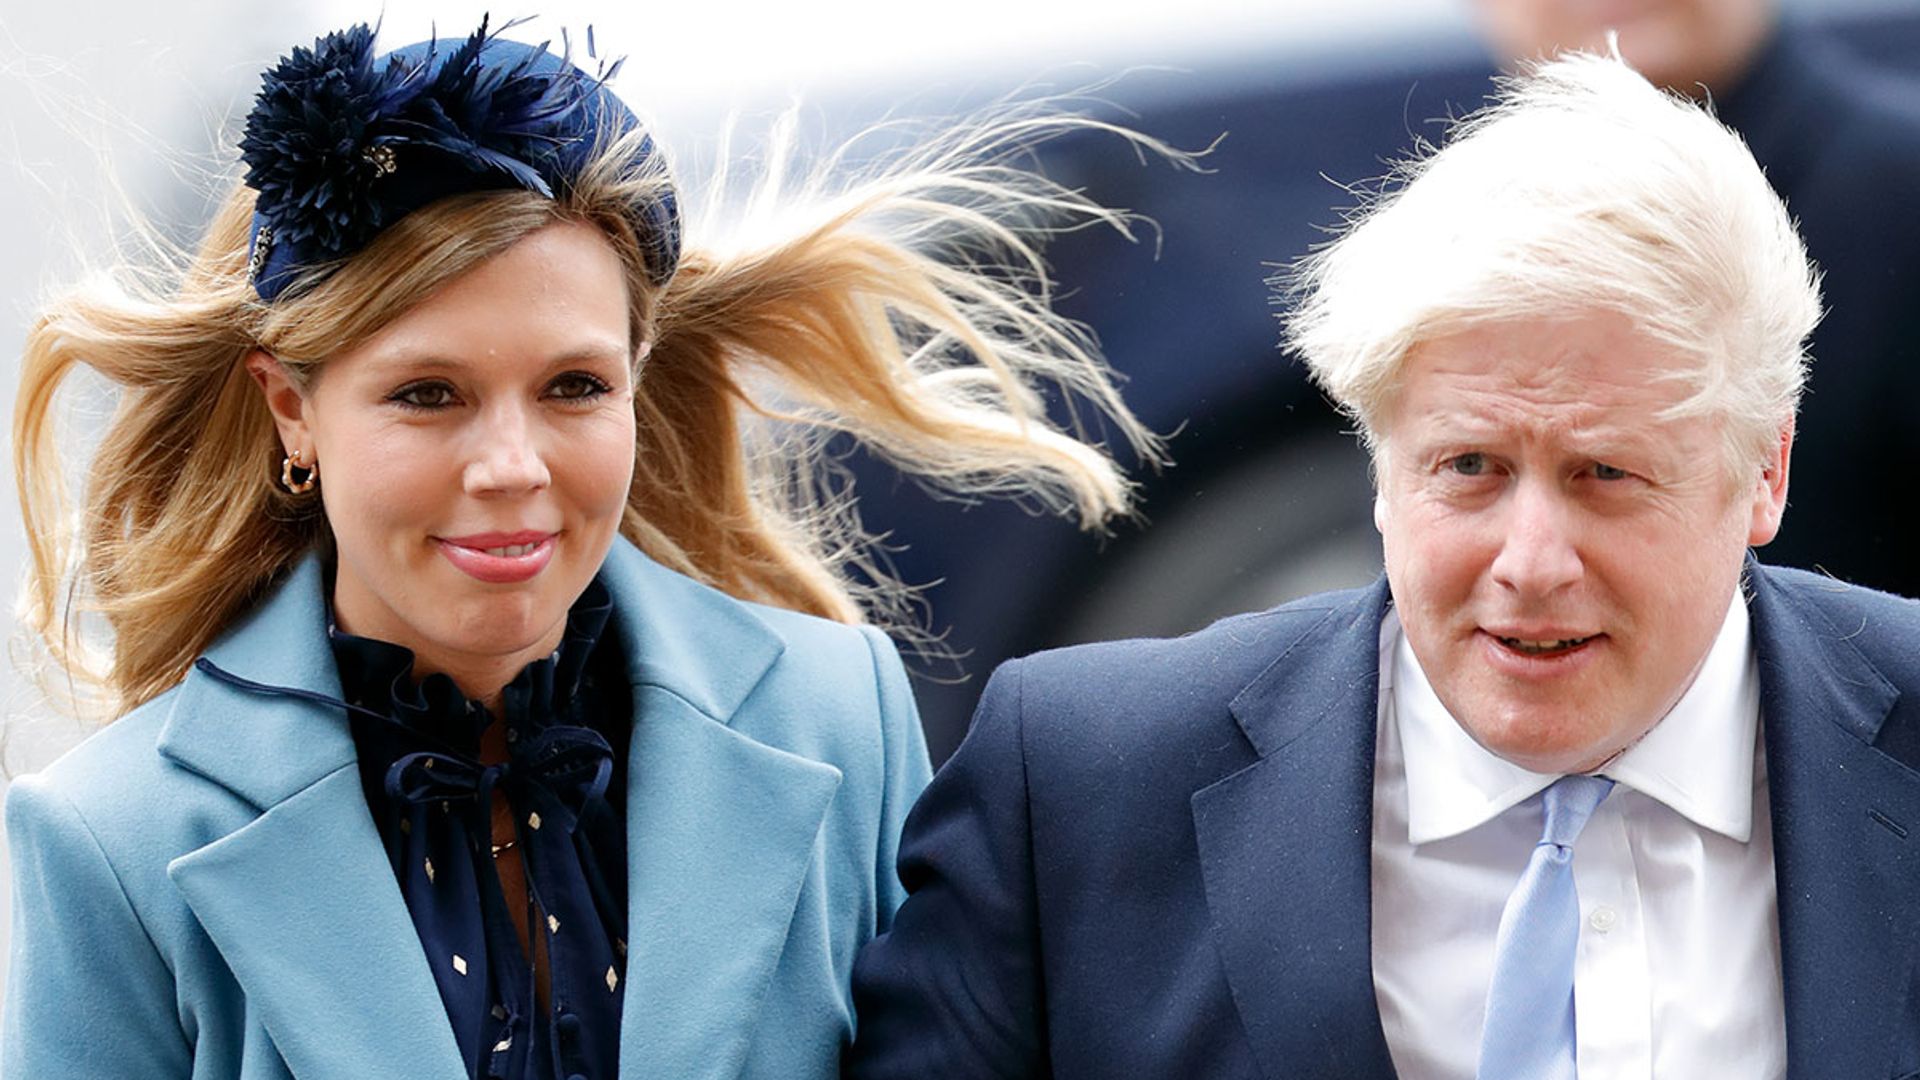 Boris Johnson and wife Carrie reveal touching name for baby daughter